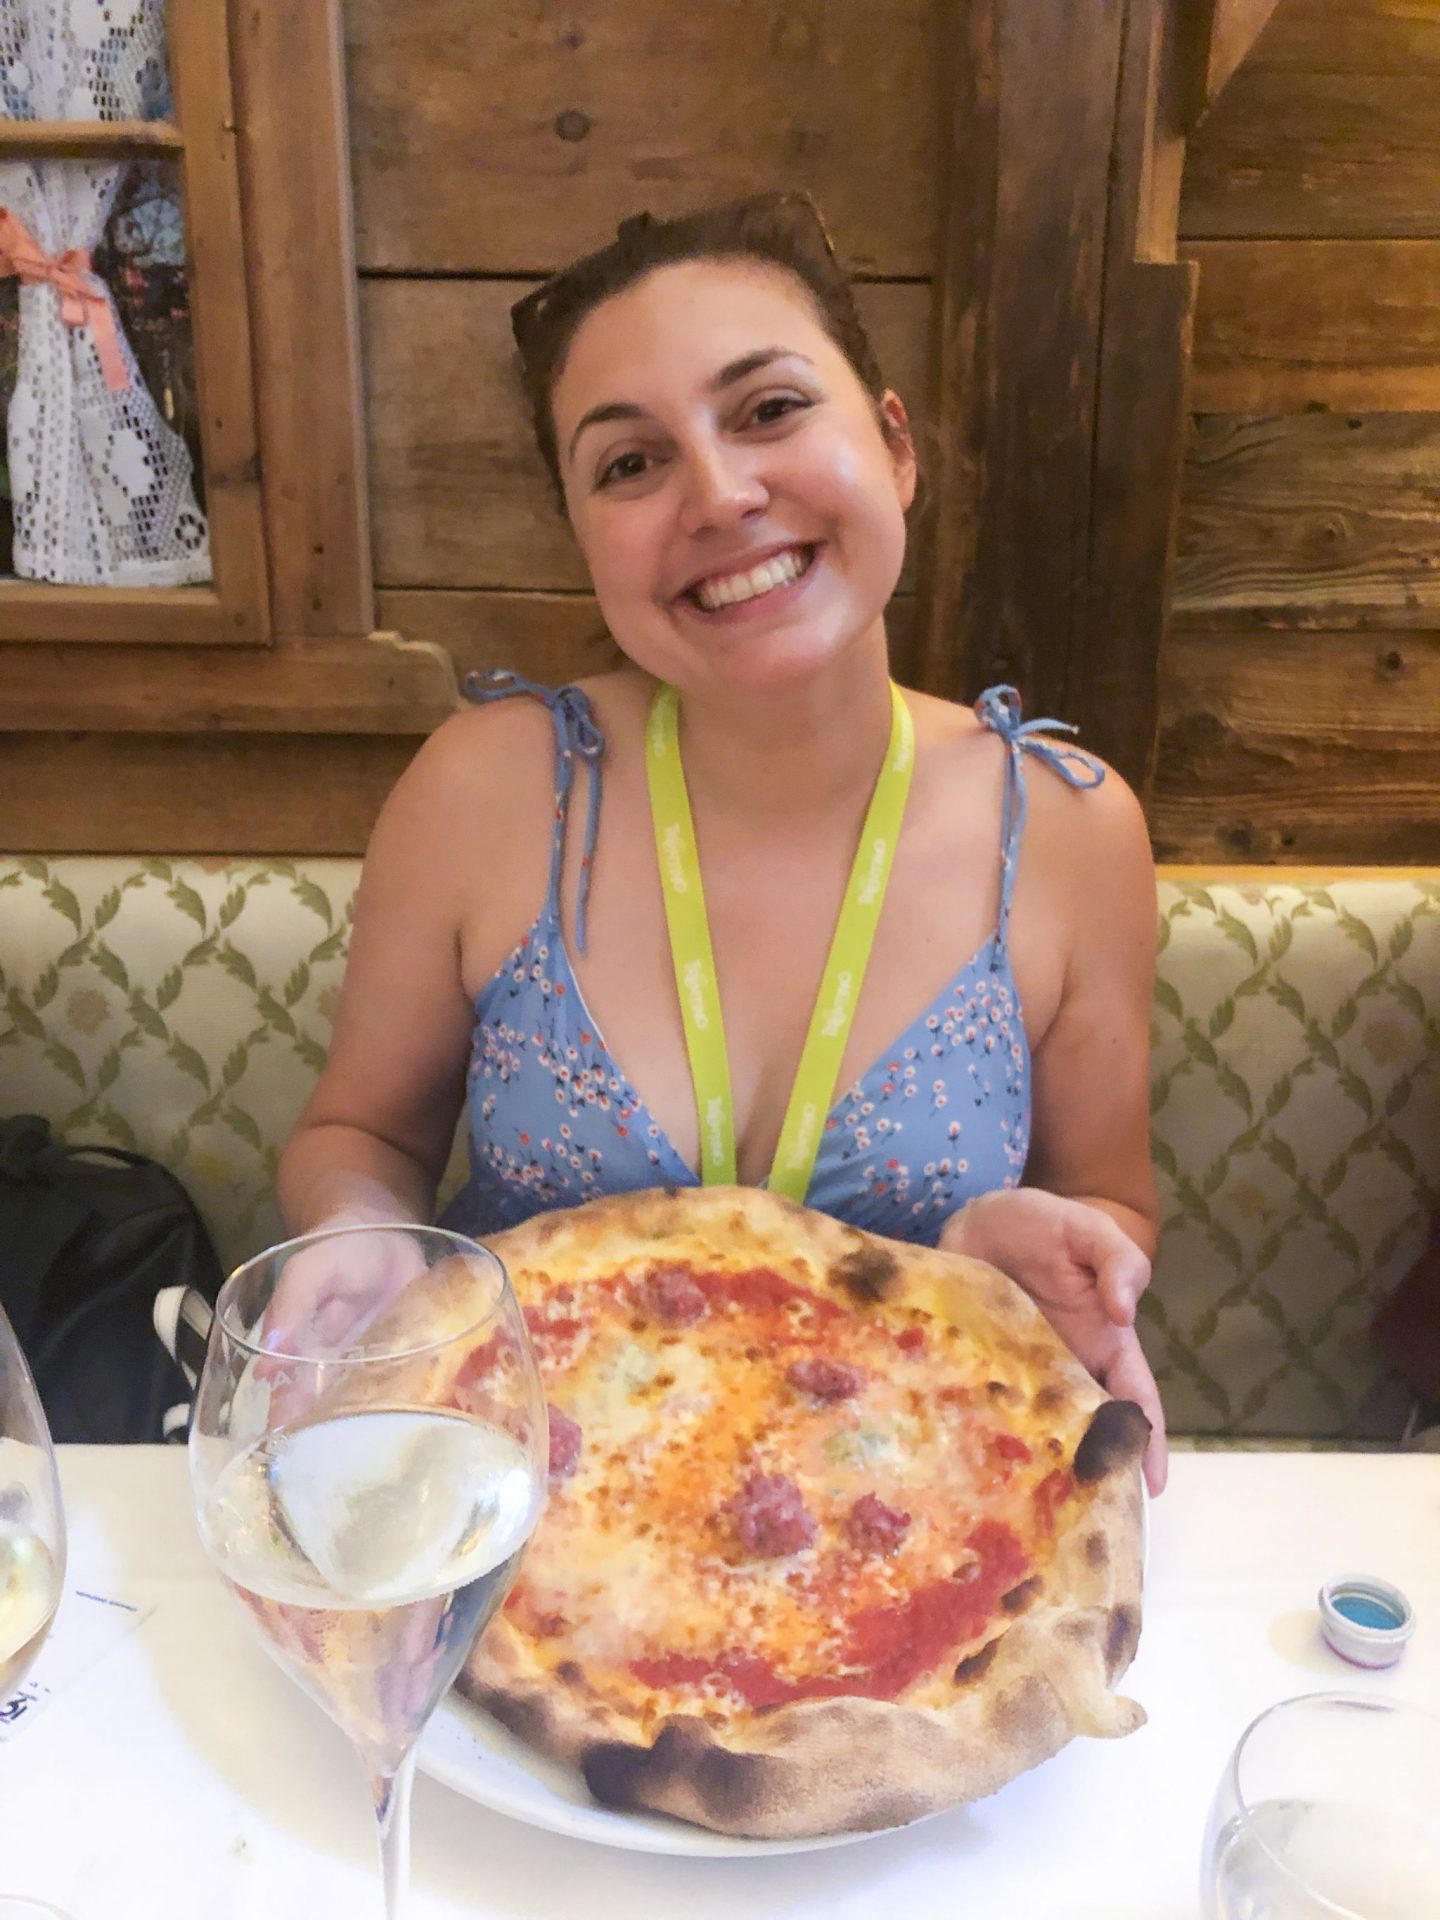 Girl smiling holding up a whole pizza with a glass of wine in front of her, eating and drinking in Trento, Trentino